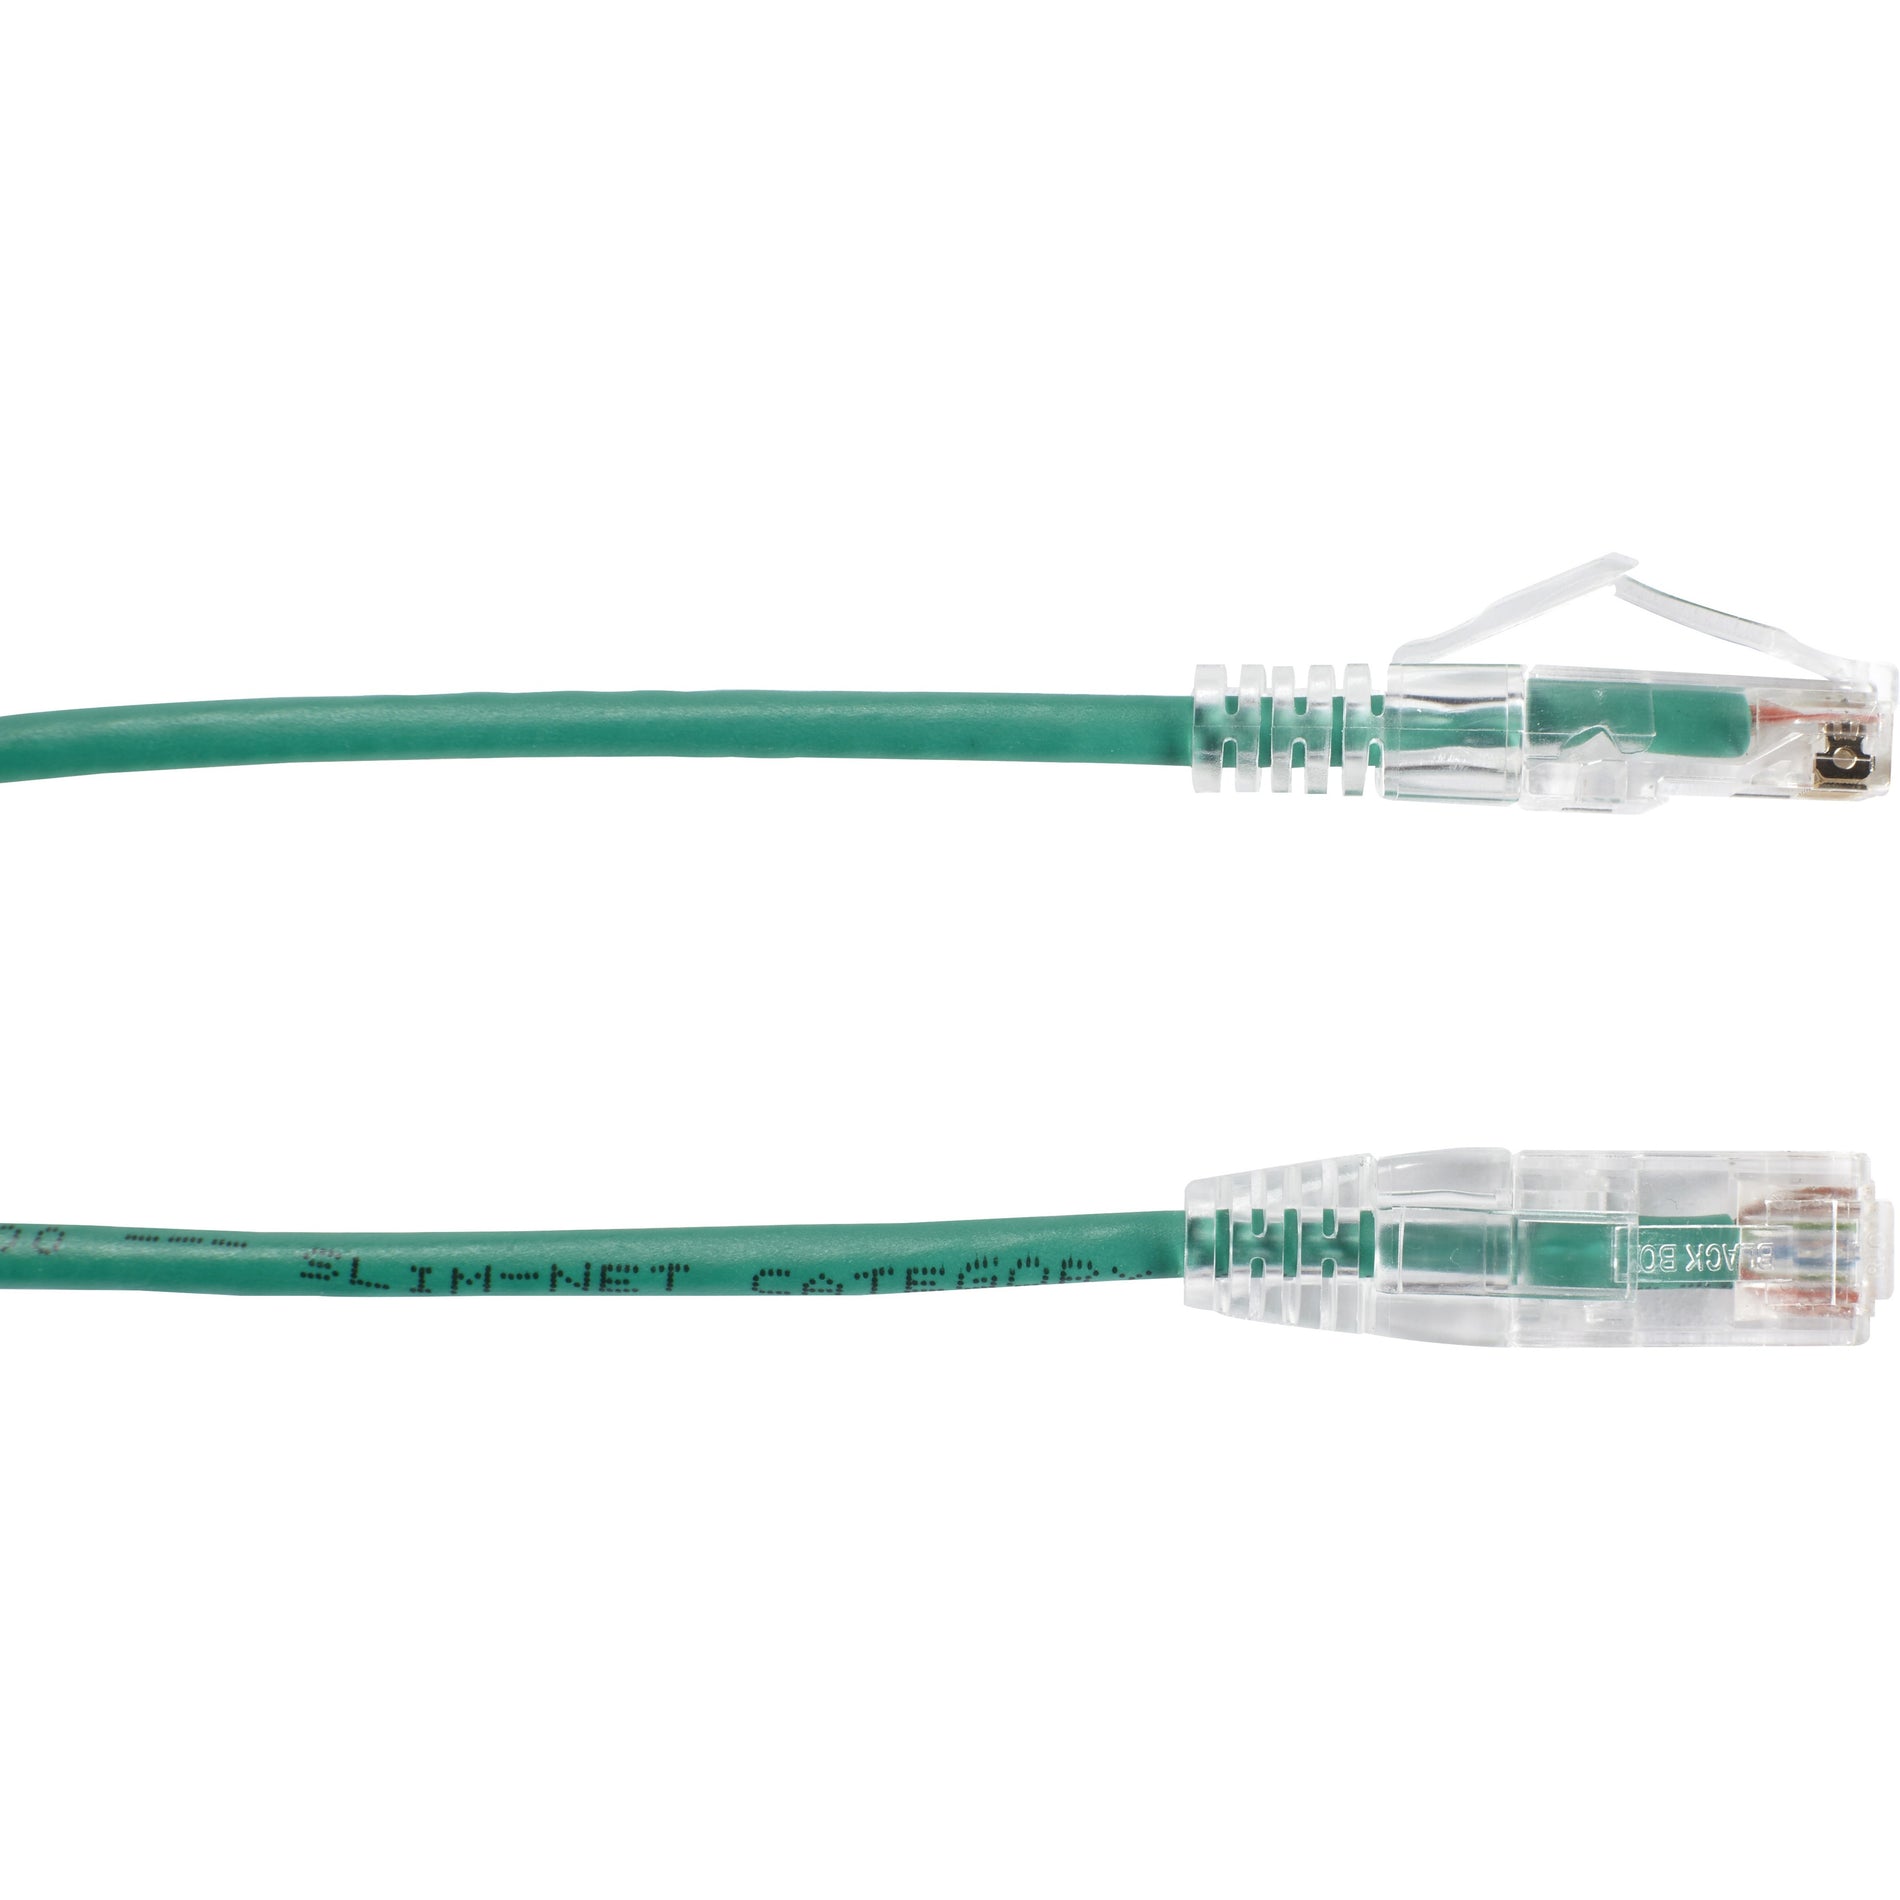 Black Box C6PC28-GN-15 Slim-Net Cat.6 UTP Patch Network Cable, 15 ft, Green